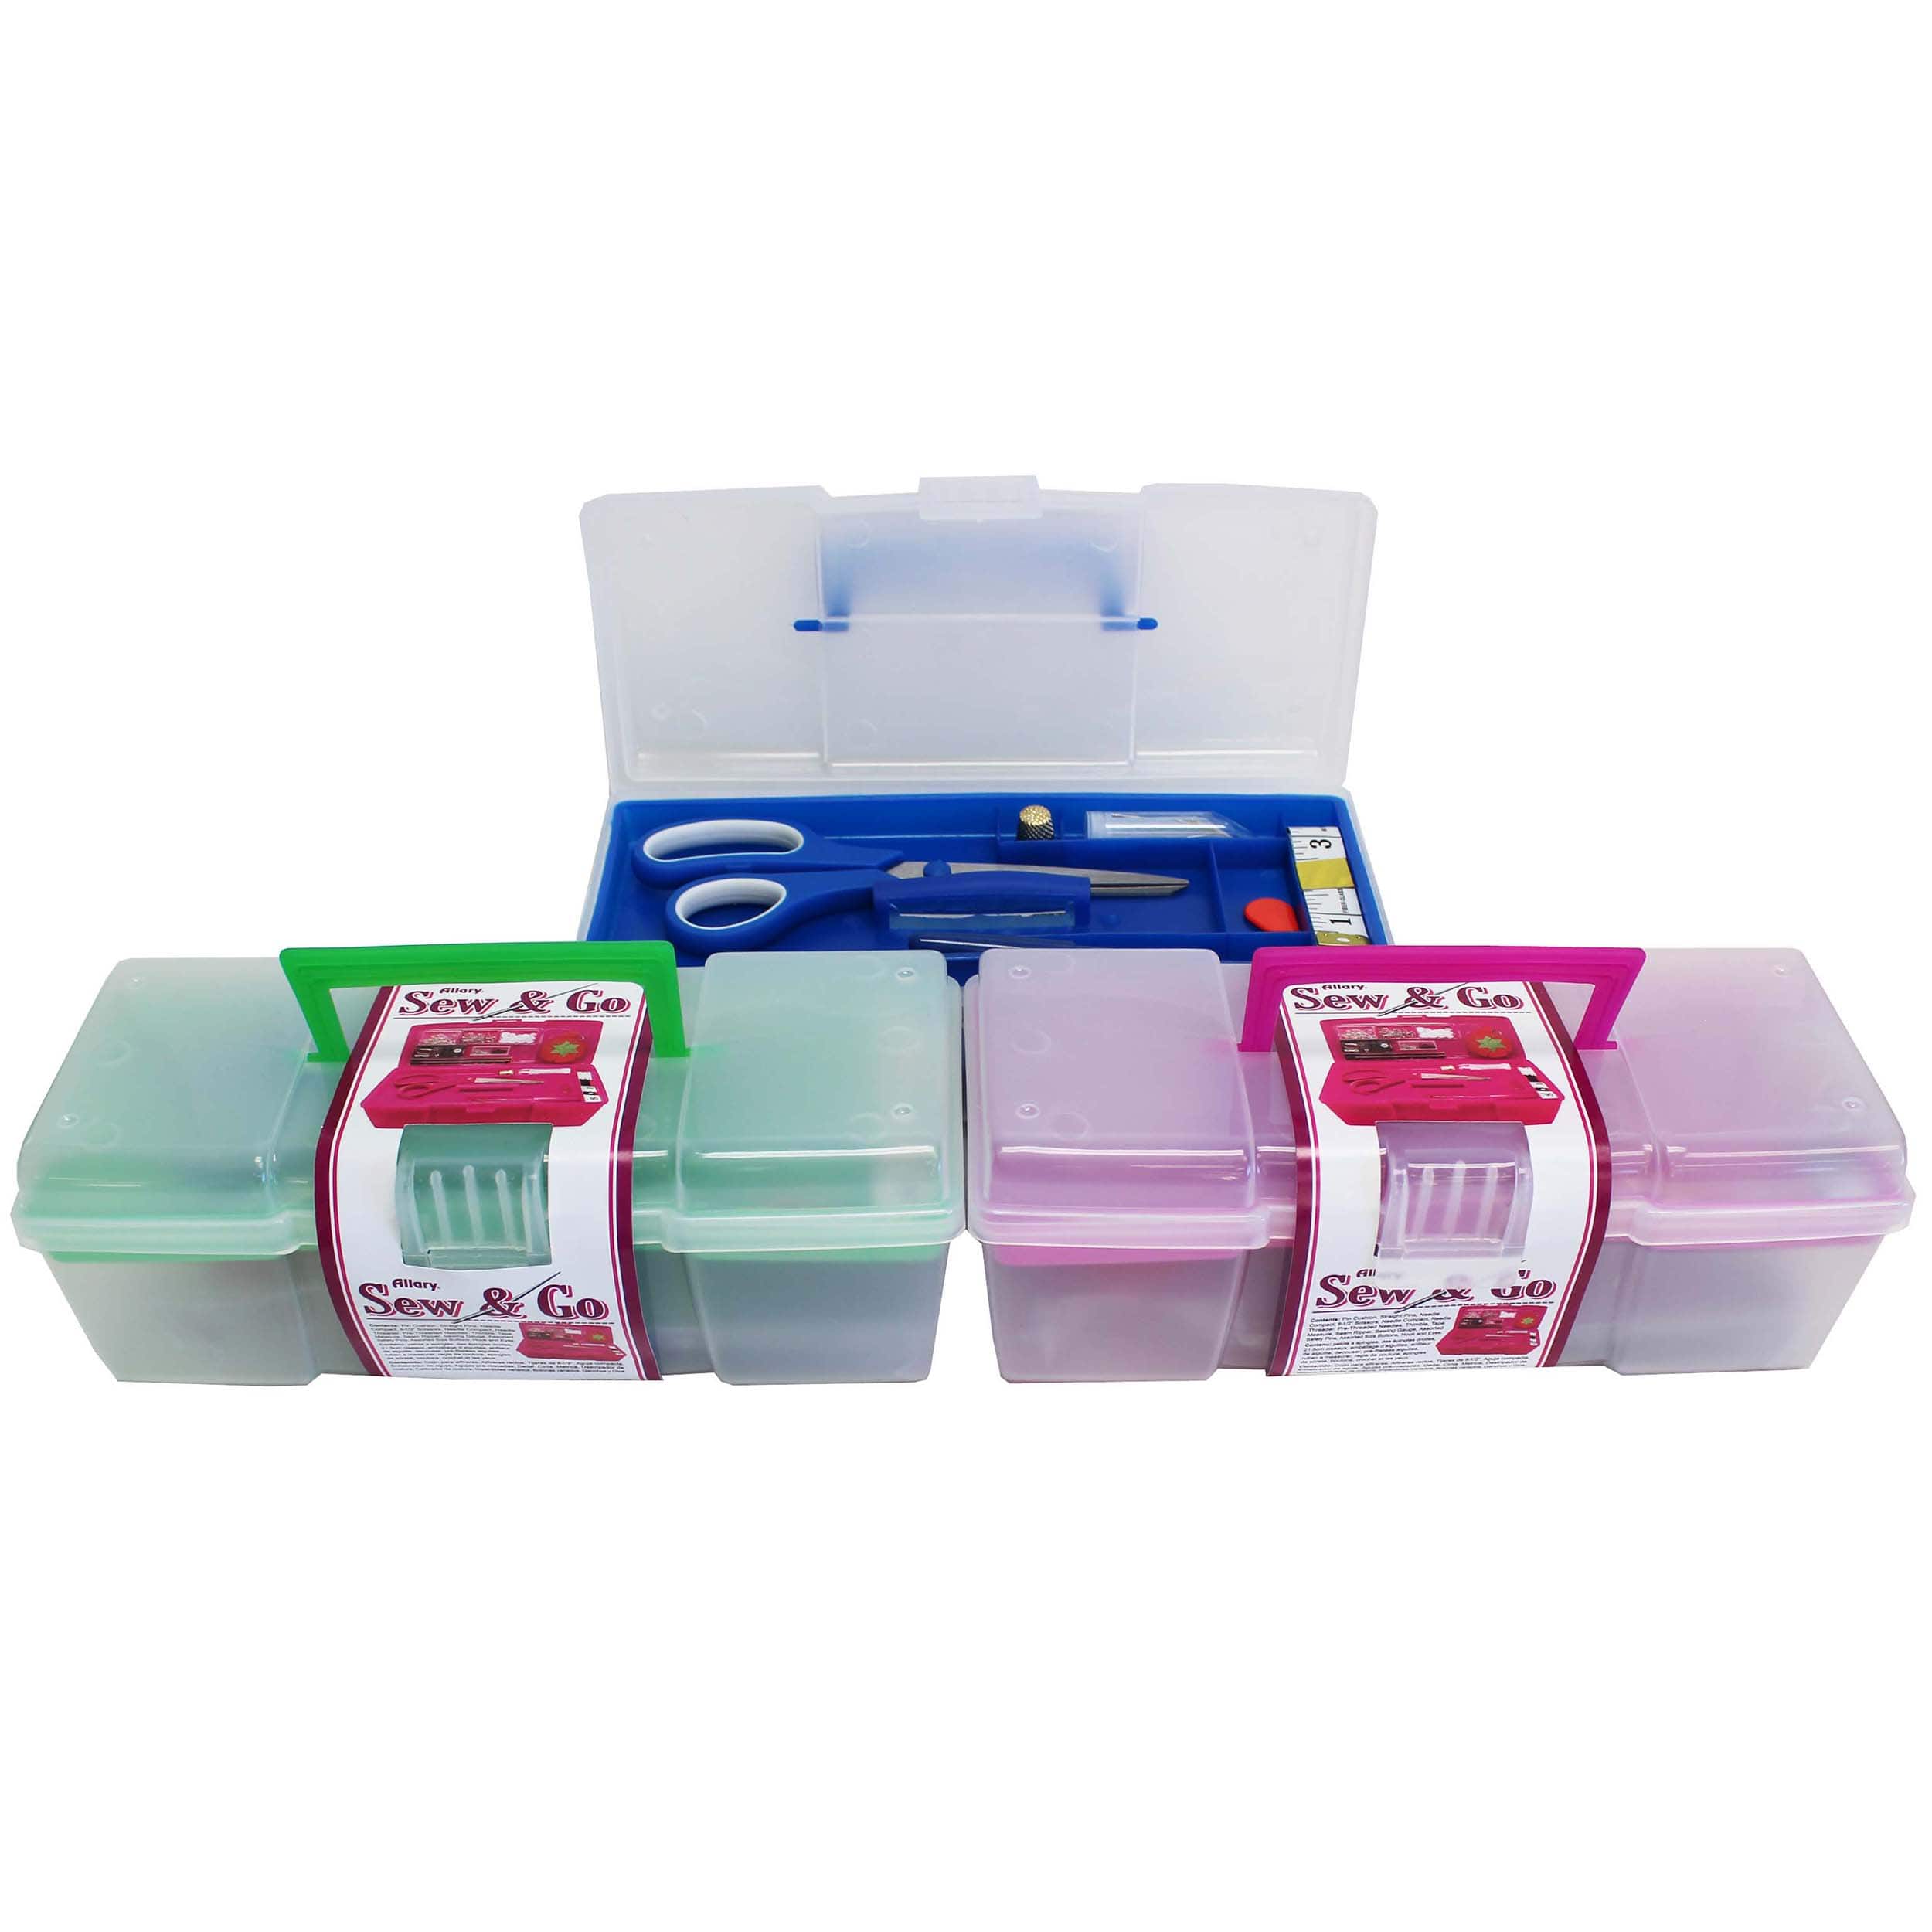 Allary Home & Travel Sewing Kit - SANE - Sewing and Housewares